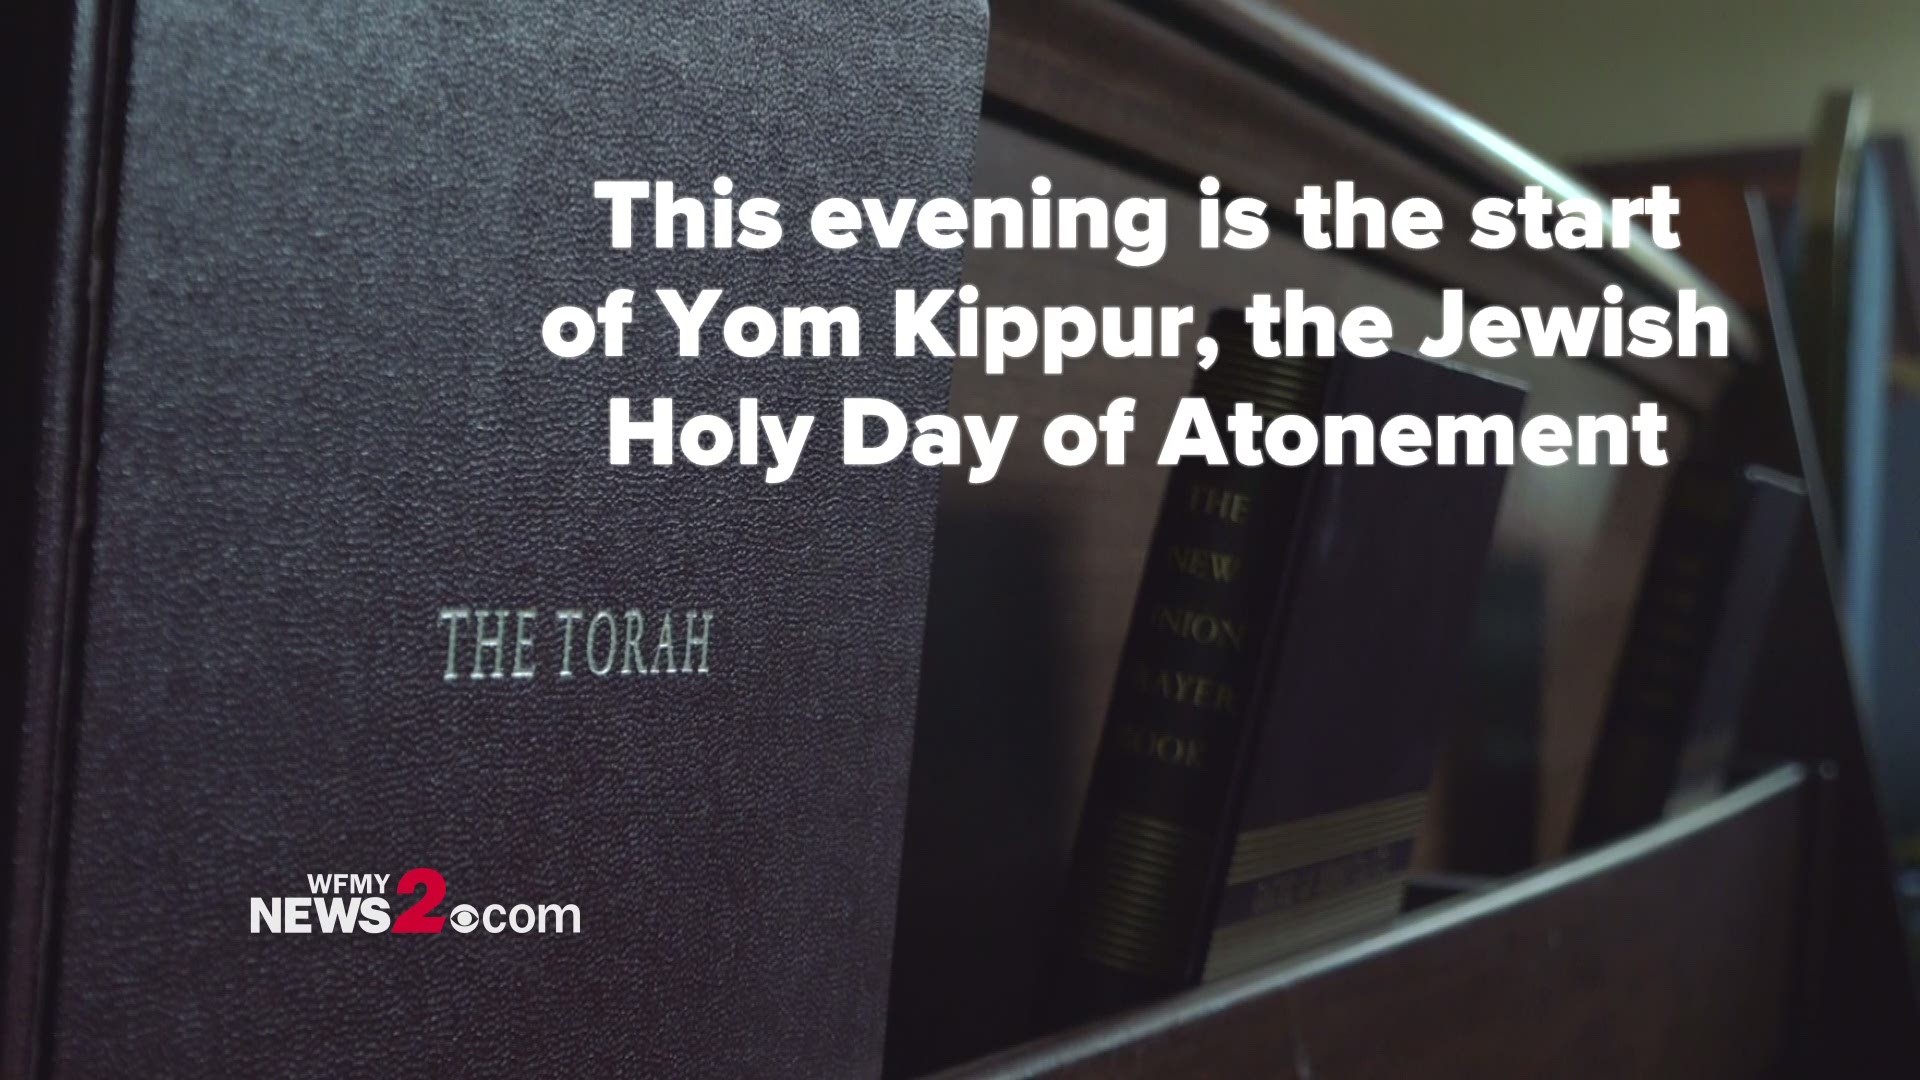 A discussion with Greensboro rabbi Andy Koren on the significance of Yom Kippur in Jewish culture.